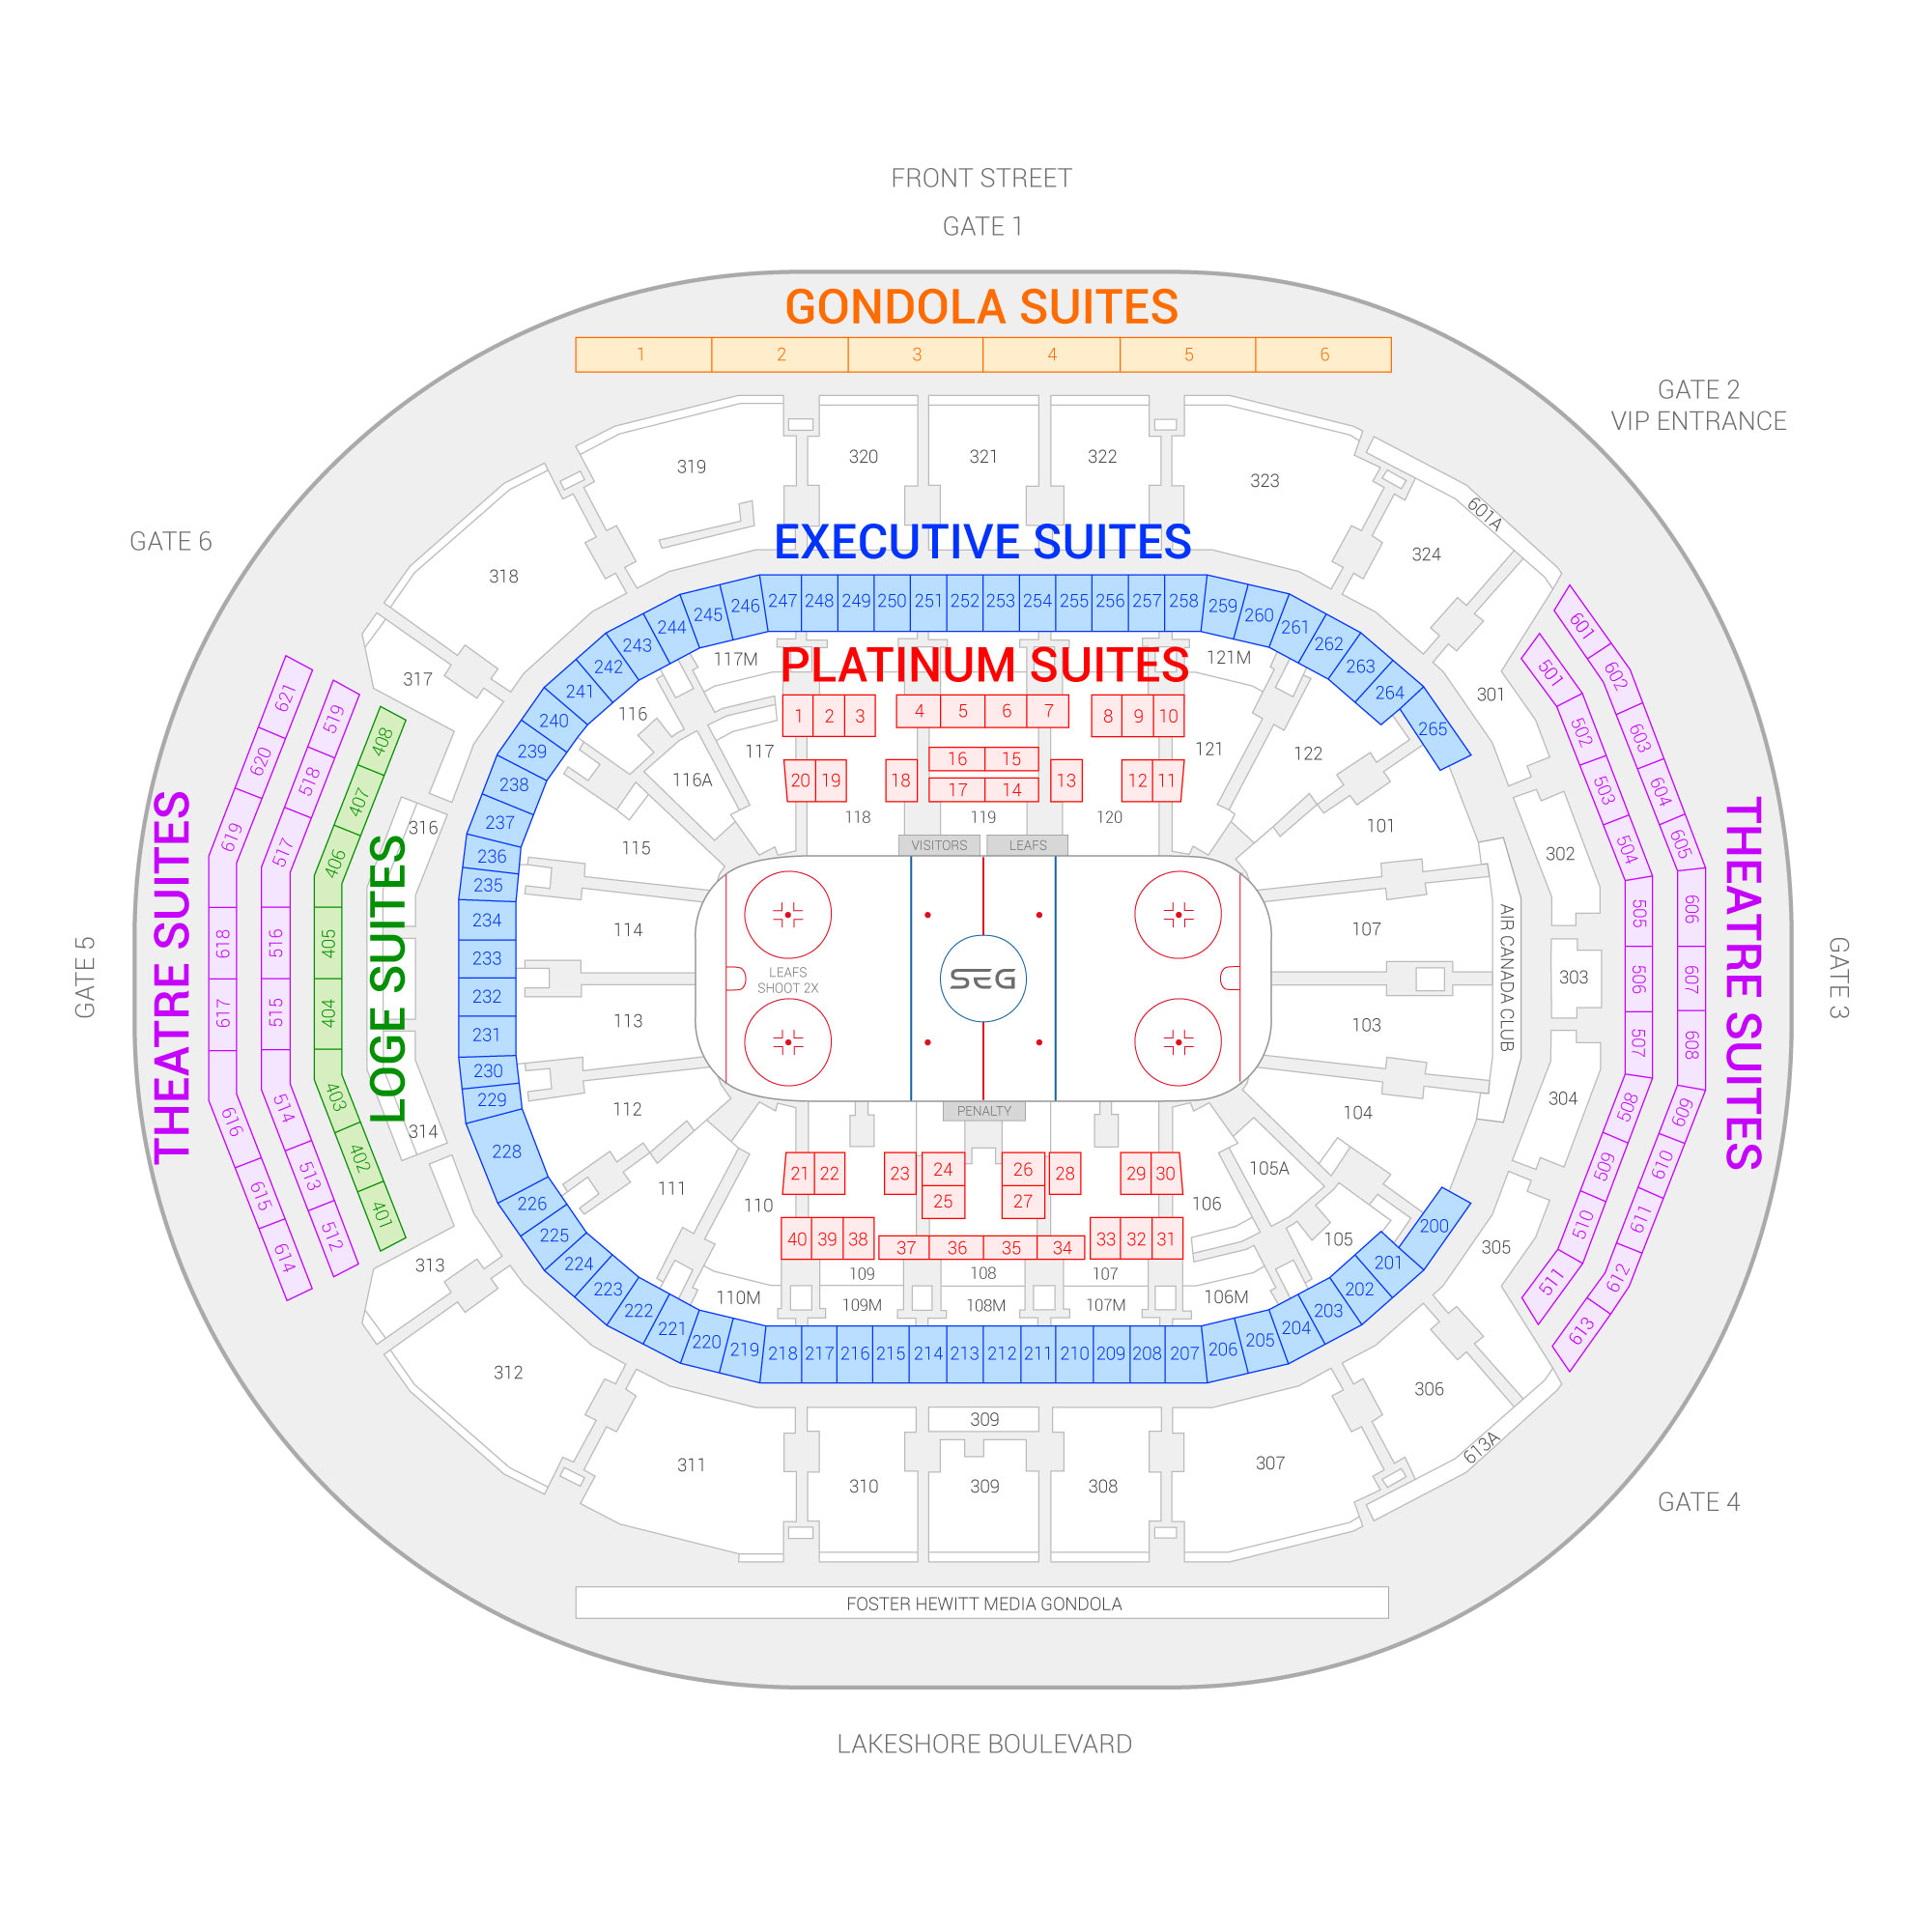 Scotiabank Arena / Toronto Maple Leafs Suite Map and Seating Chart